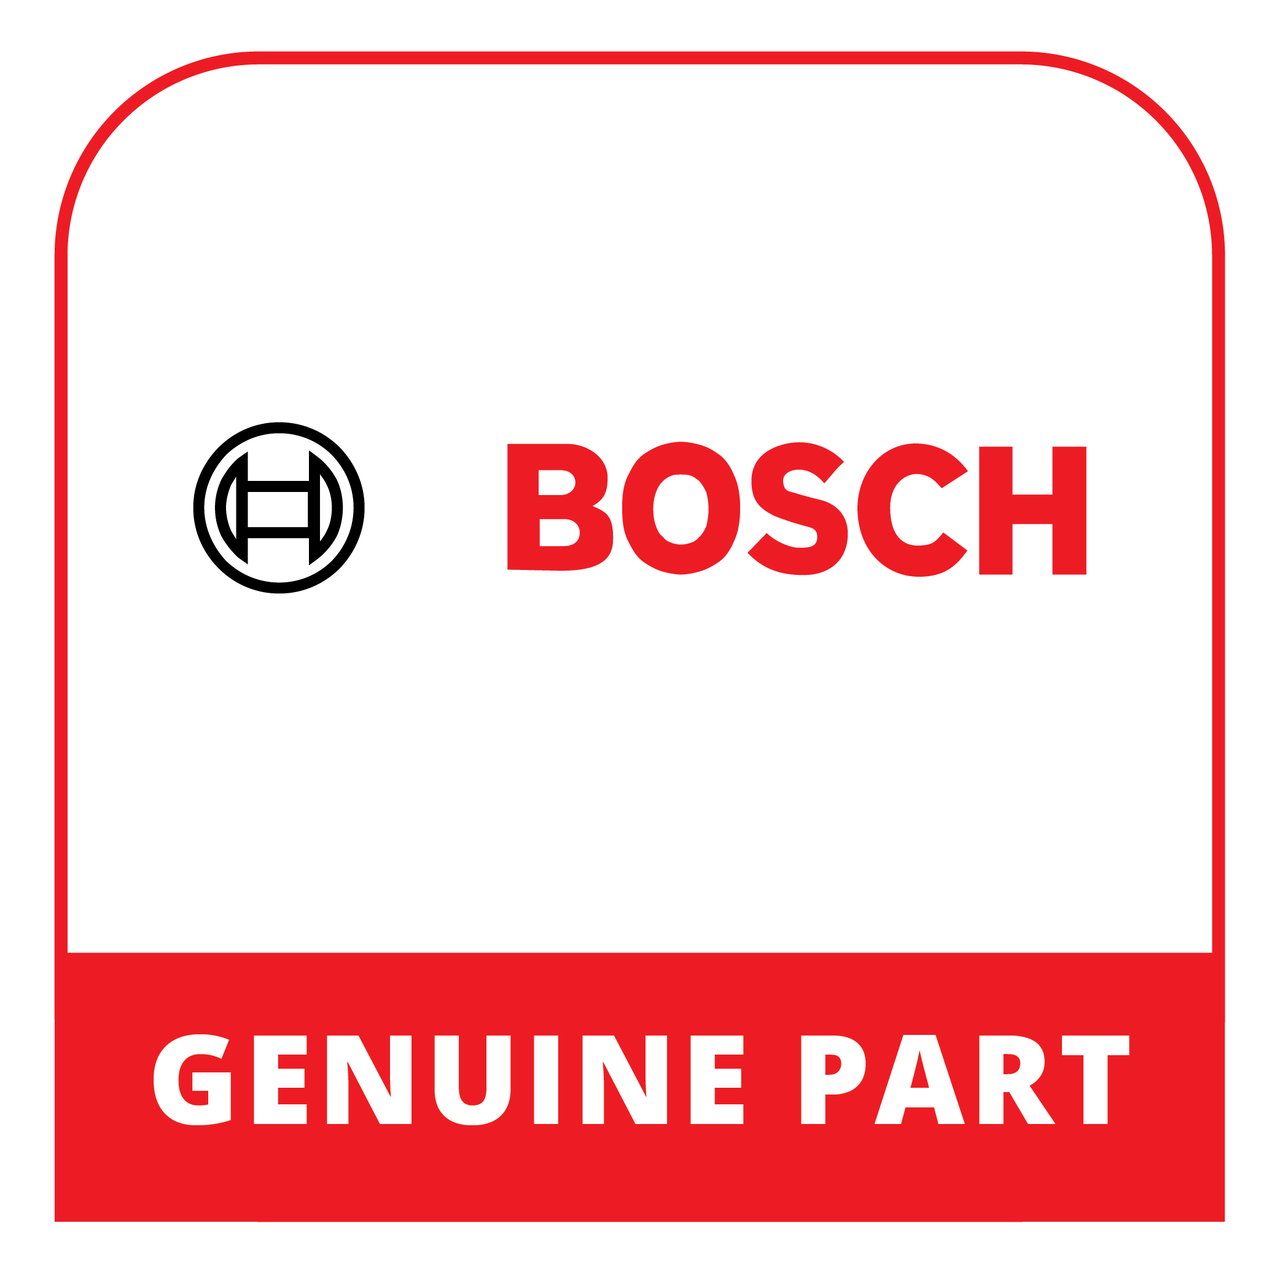 Bosch (Thermador) 18077507 - Instruction Manual - Genuine Bosch (Thermador) Part